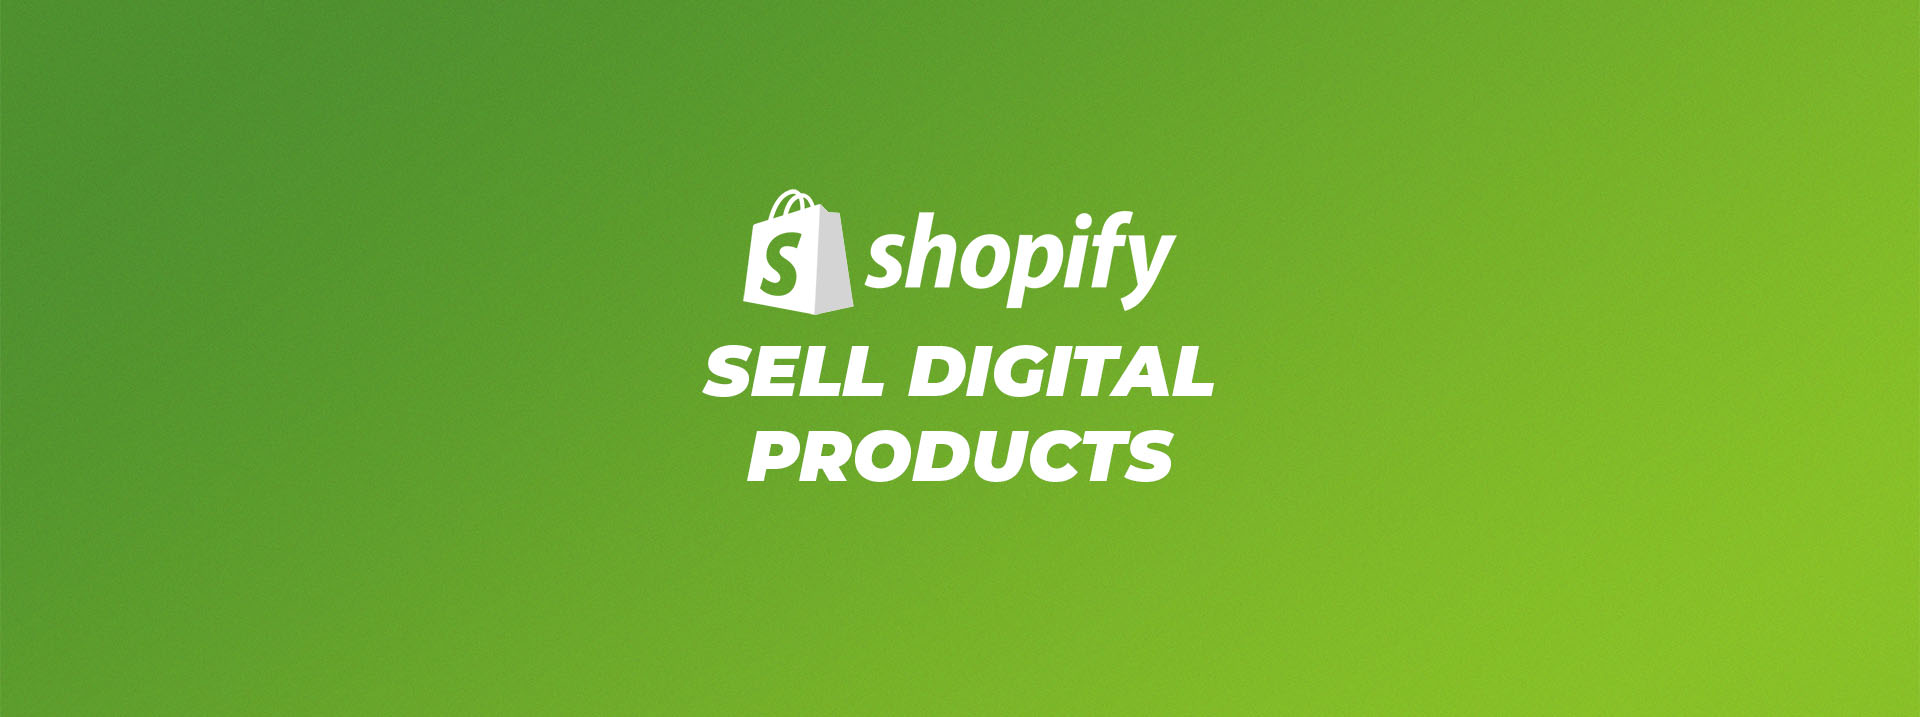 Best Platform to Buy and Sell Digital Products - Uplinkly Software